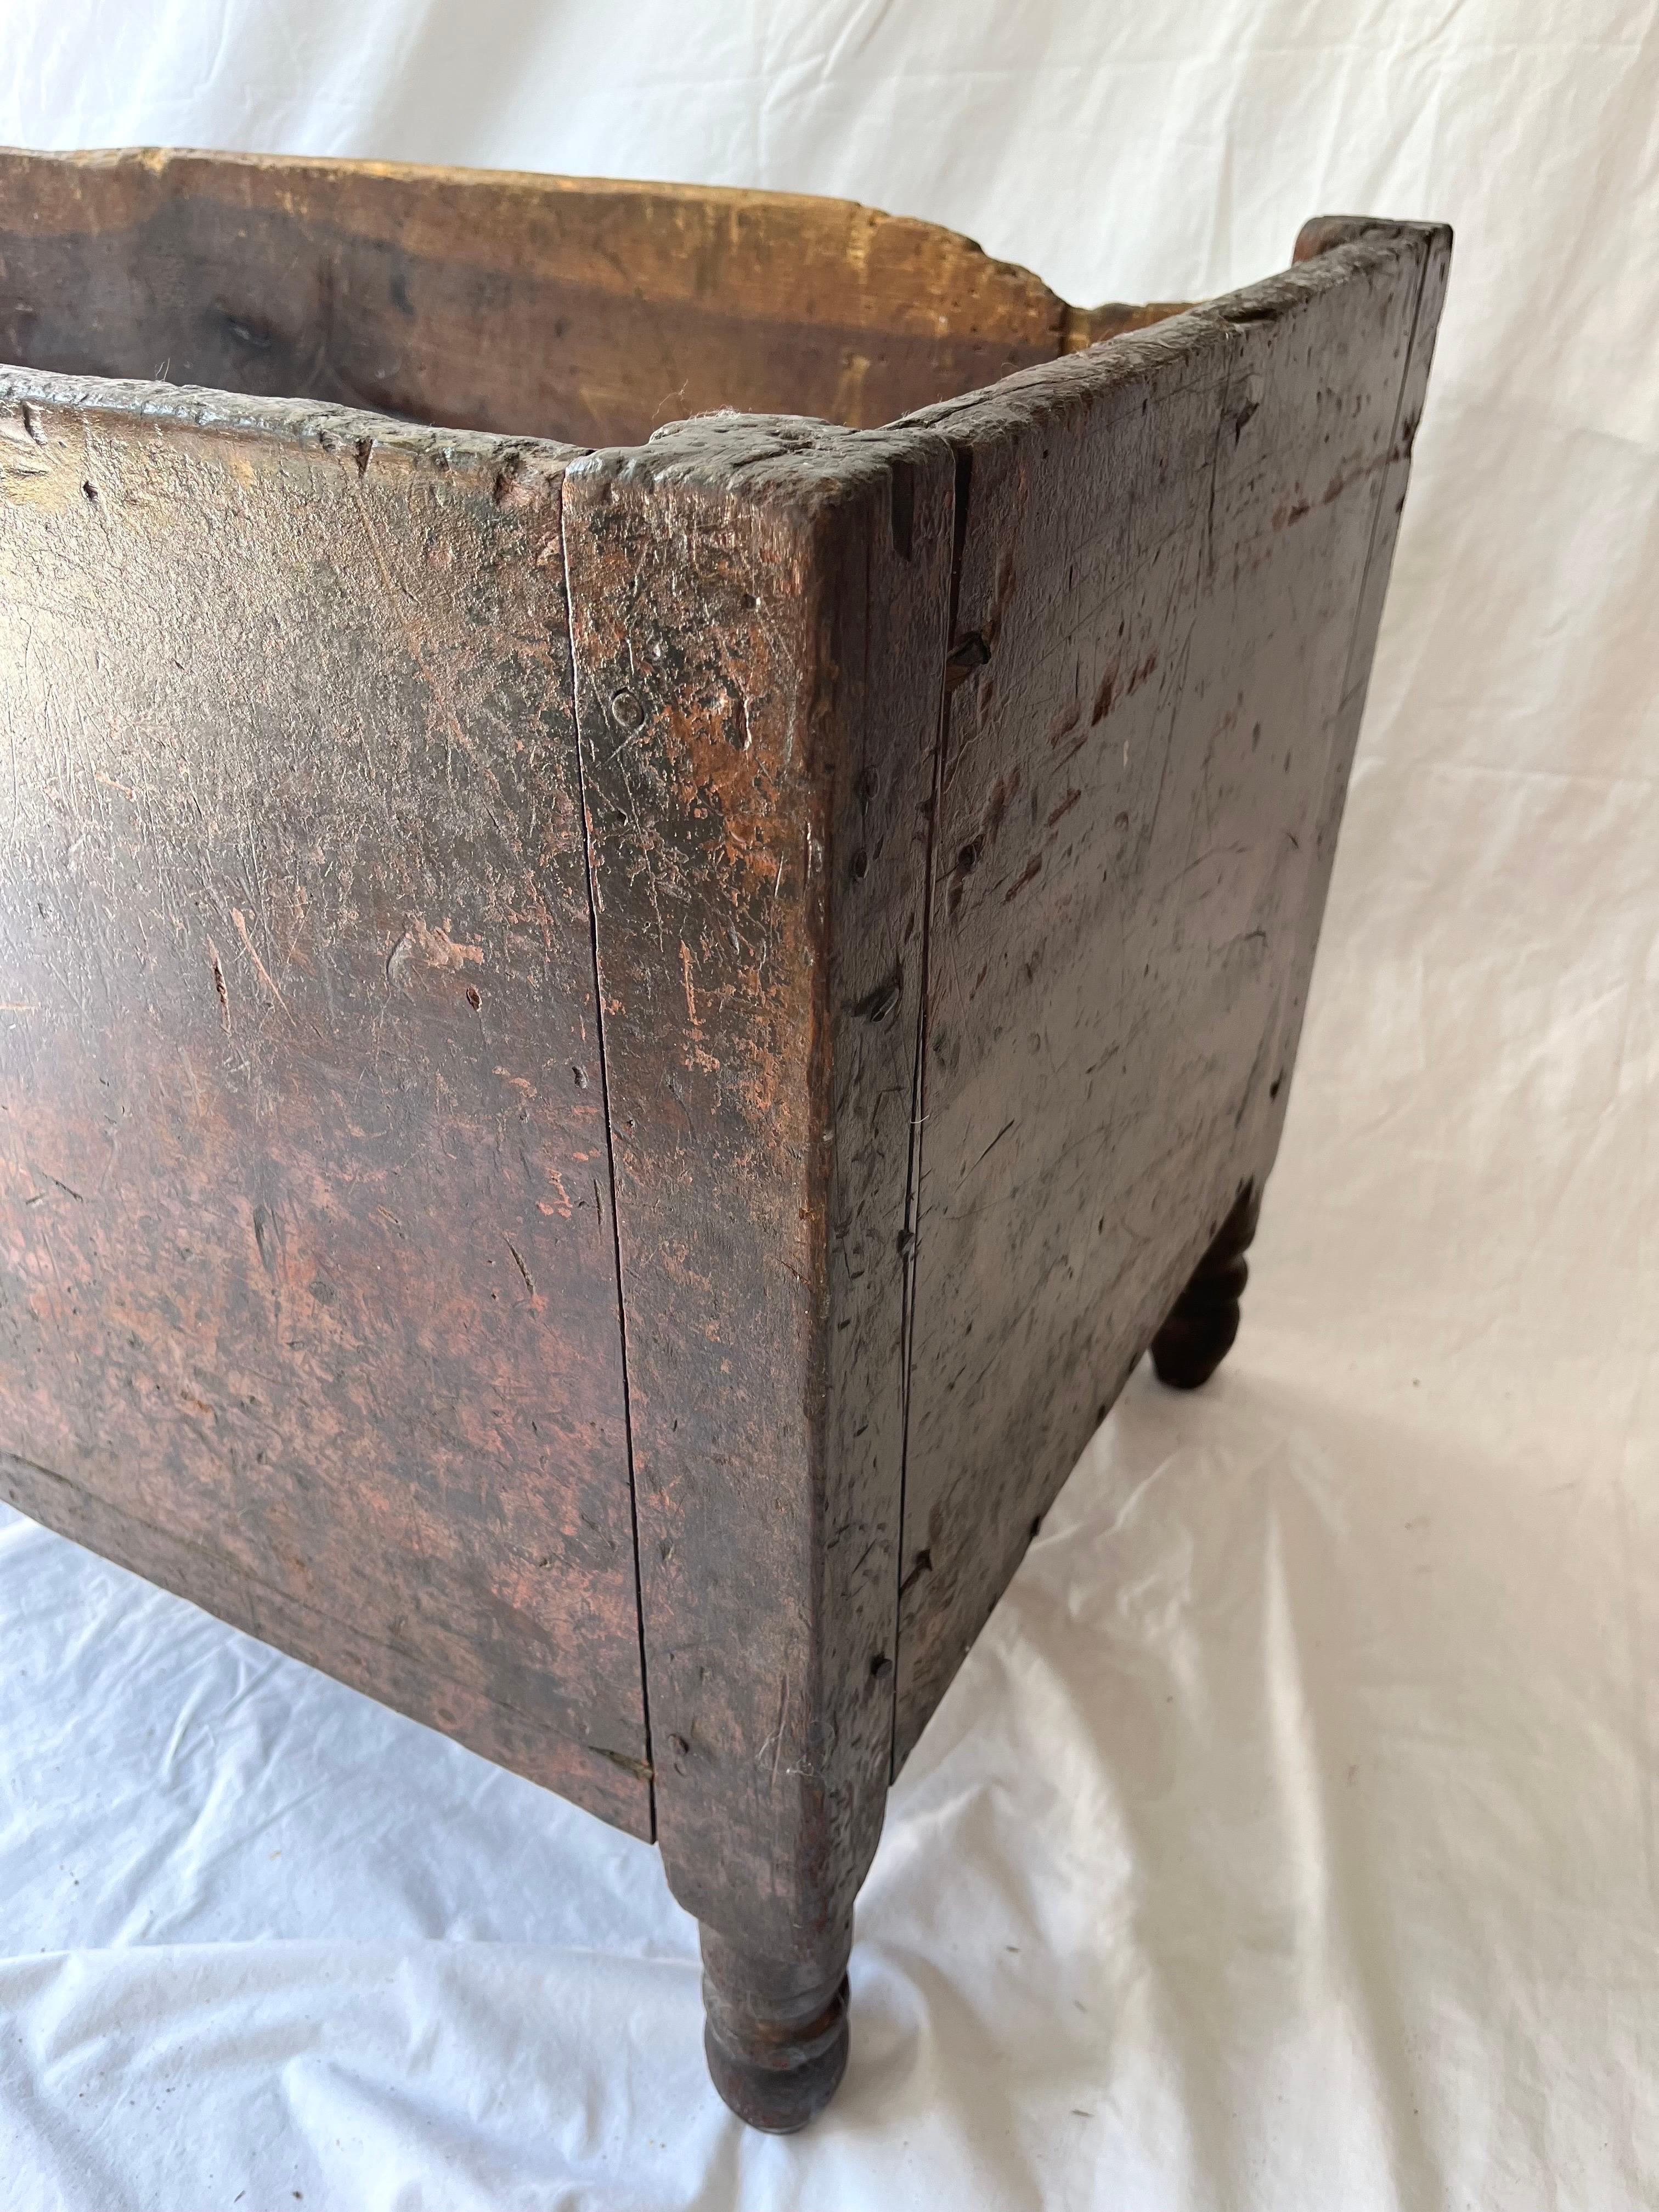 Rustic Tennessee Antique American Hand Built Primitive Blanket Chest Relic Cow Feeder For Sale